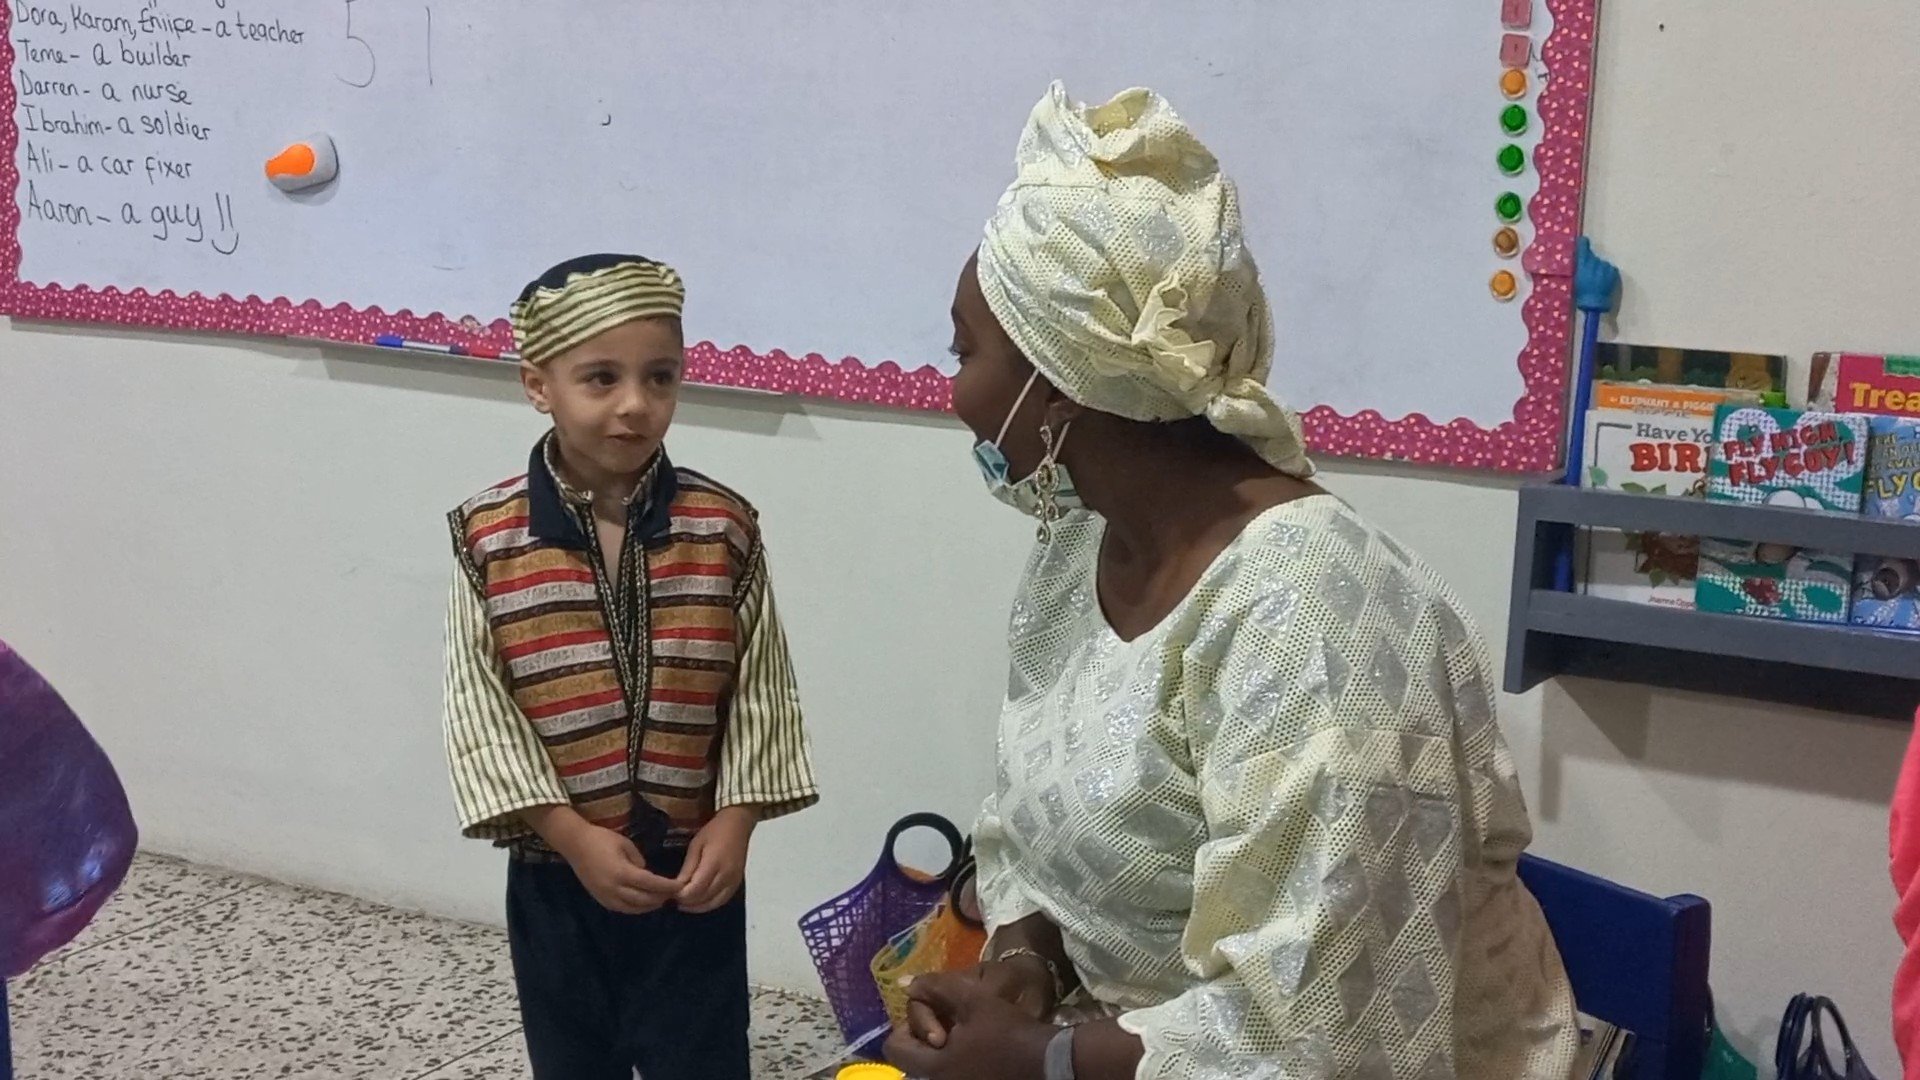  -&nbsp;&nbsp;&nbsp;&nbsp;&nbsp;&nbsp;&nbsp; KG Social Studies: People are People Everywhere!  KG students are learning that “God created people of all cultures and backgrounds.” Dressed up in their diverse cultural attire, they all shared a bit abou